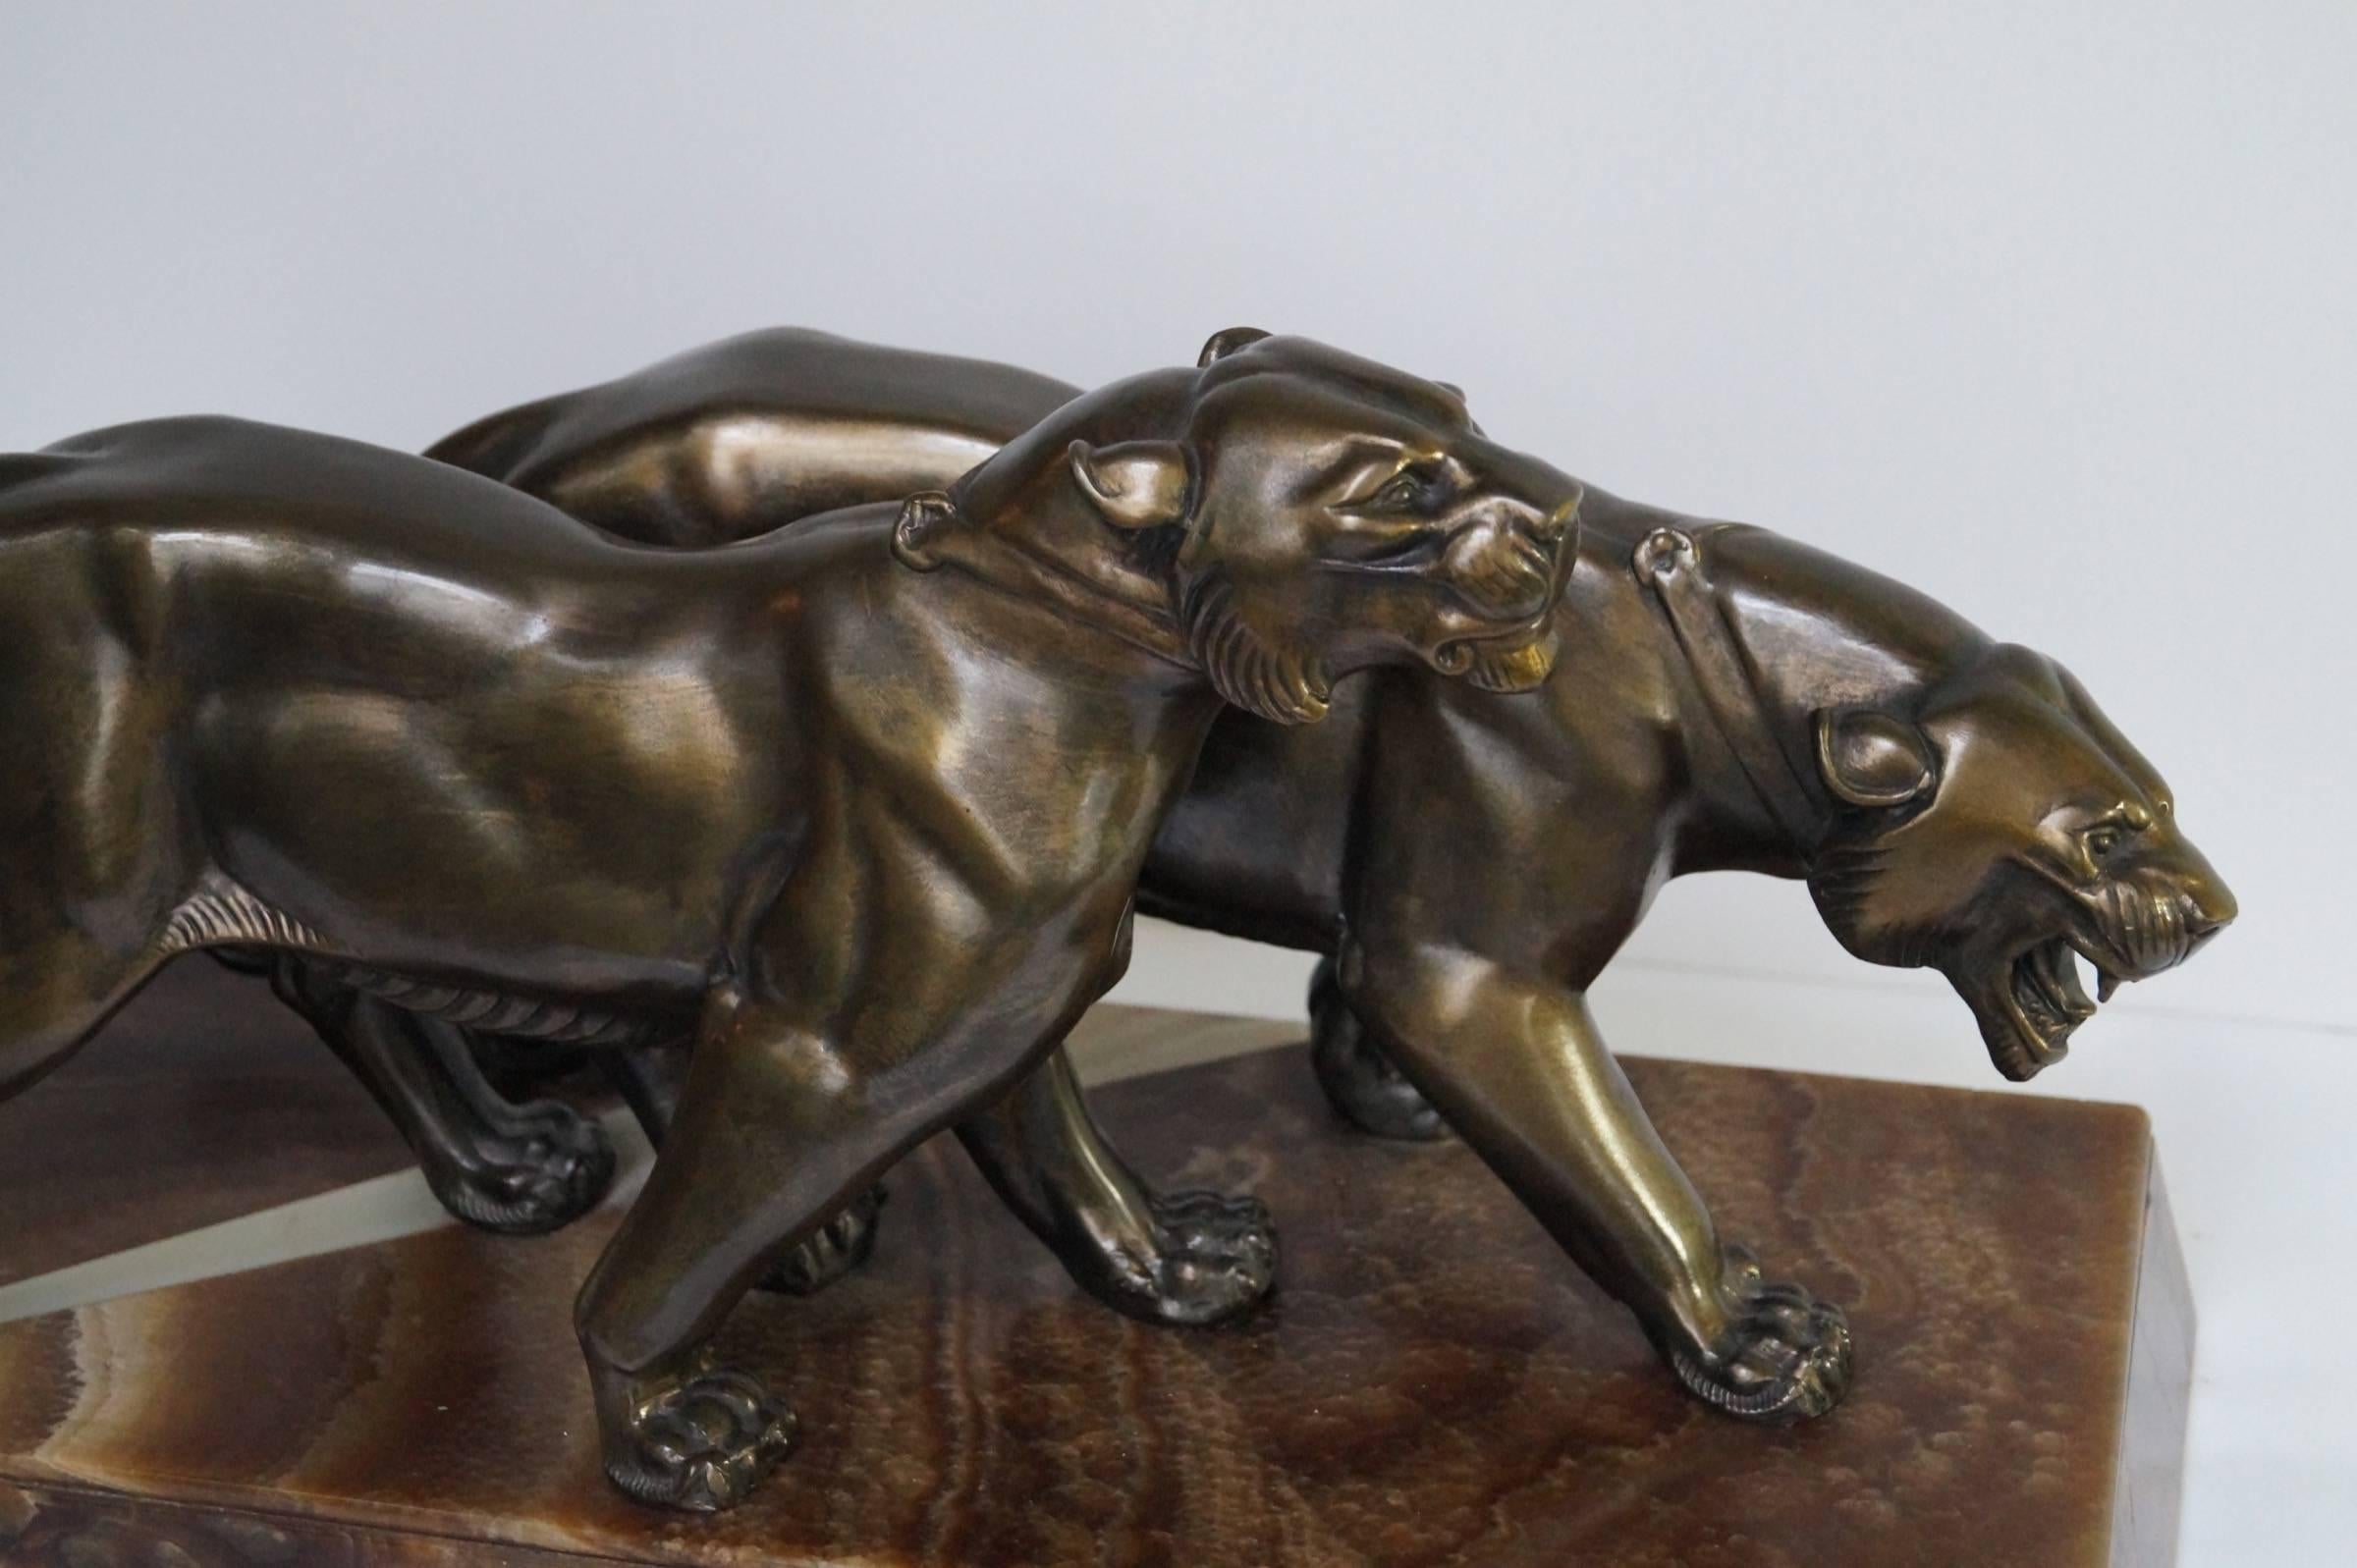 France 1930s signed Uriano.
Pair of beautiful patinated bronze lions on a marble base.
Perfect condition.

Measures: H 27 x W 52cm x D 20cm.